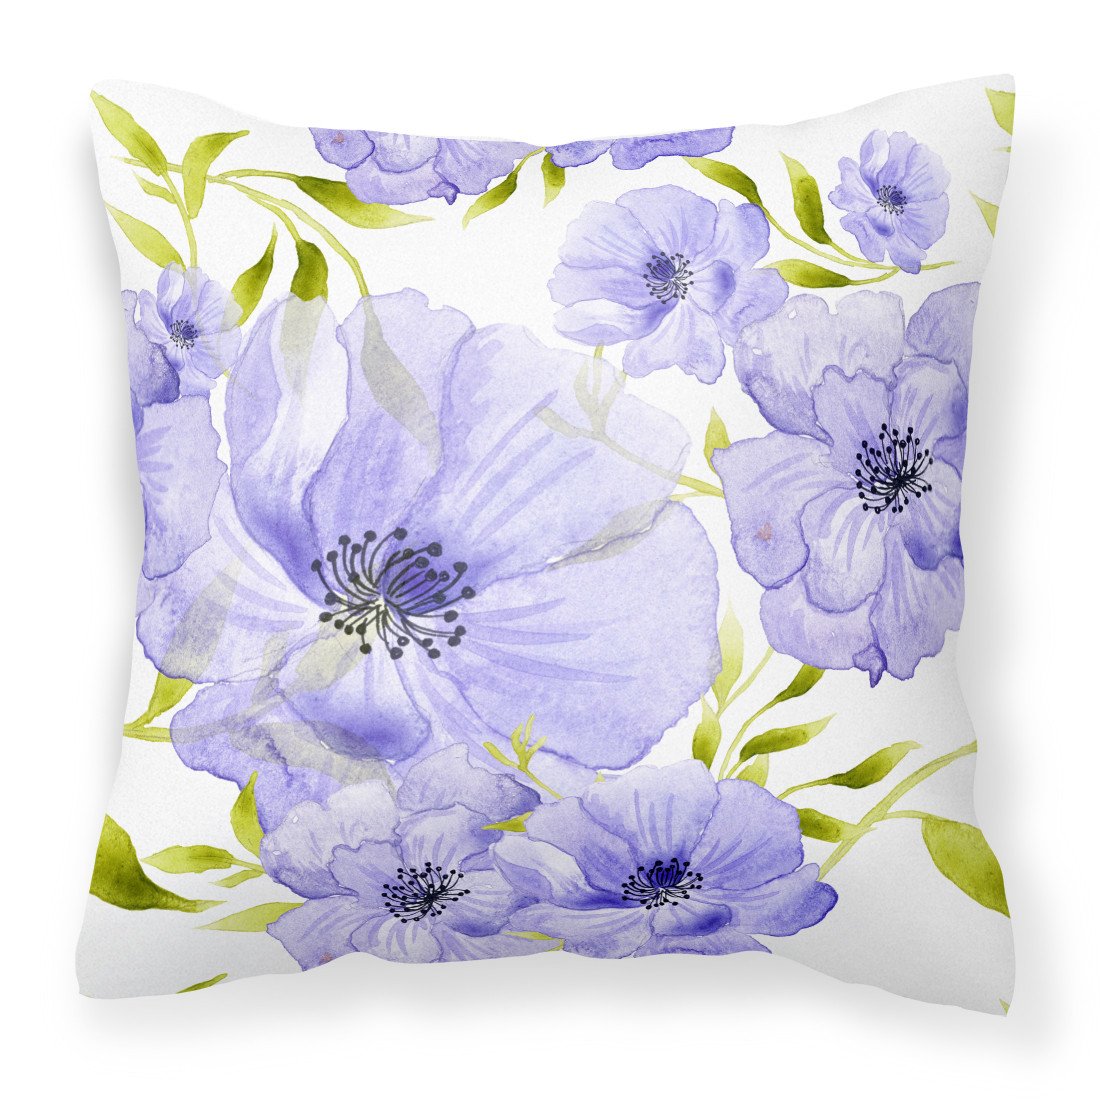 Watercolor Blue Flowers Fabric Decorative Pillow BB7491PW1818 by Caroline's Treasures